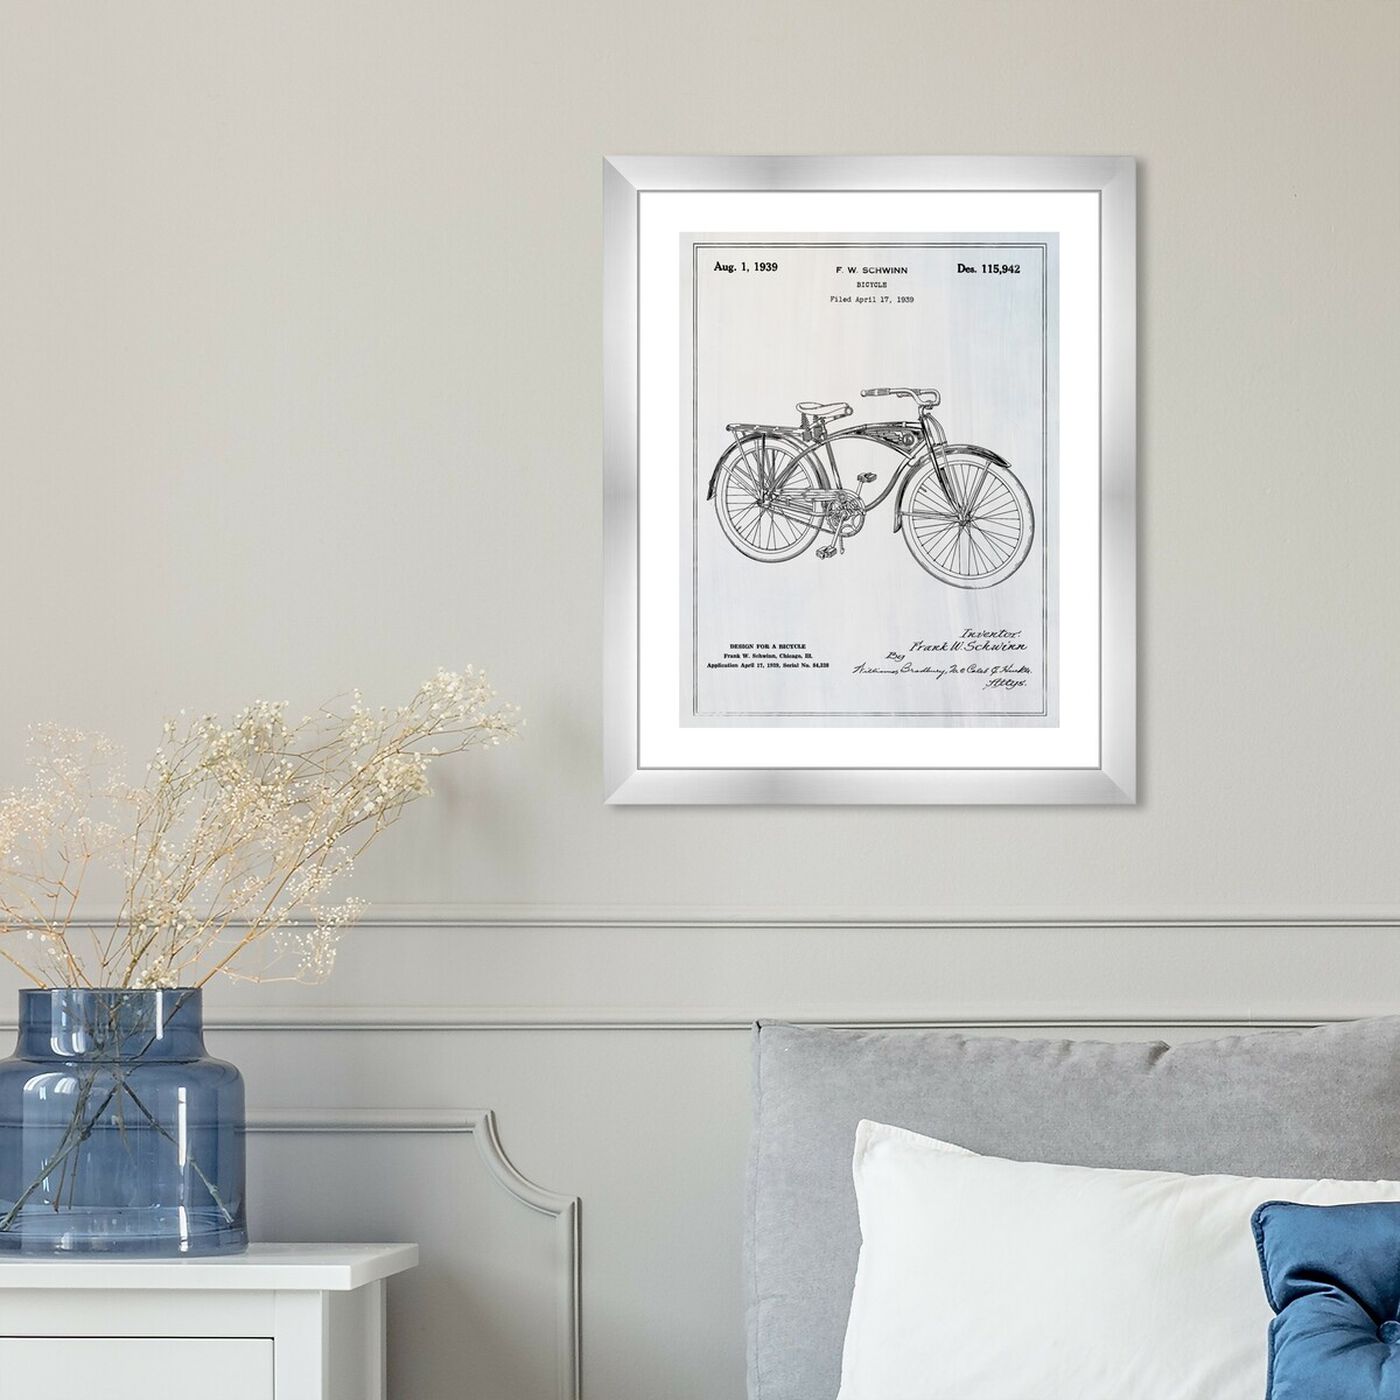 Hanging view of Schwinn Bicycle featuring transportation and bicycles art.